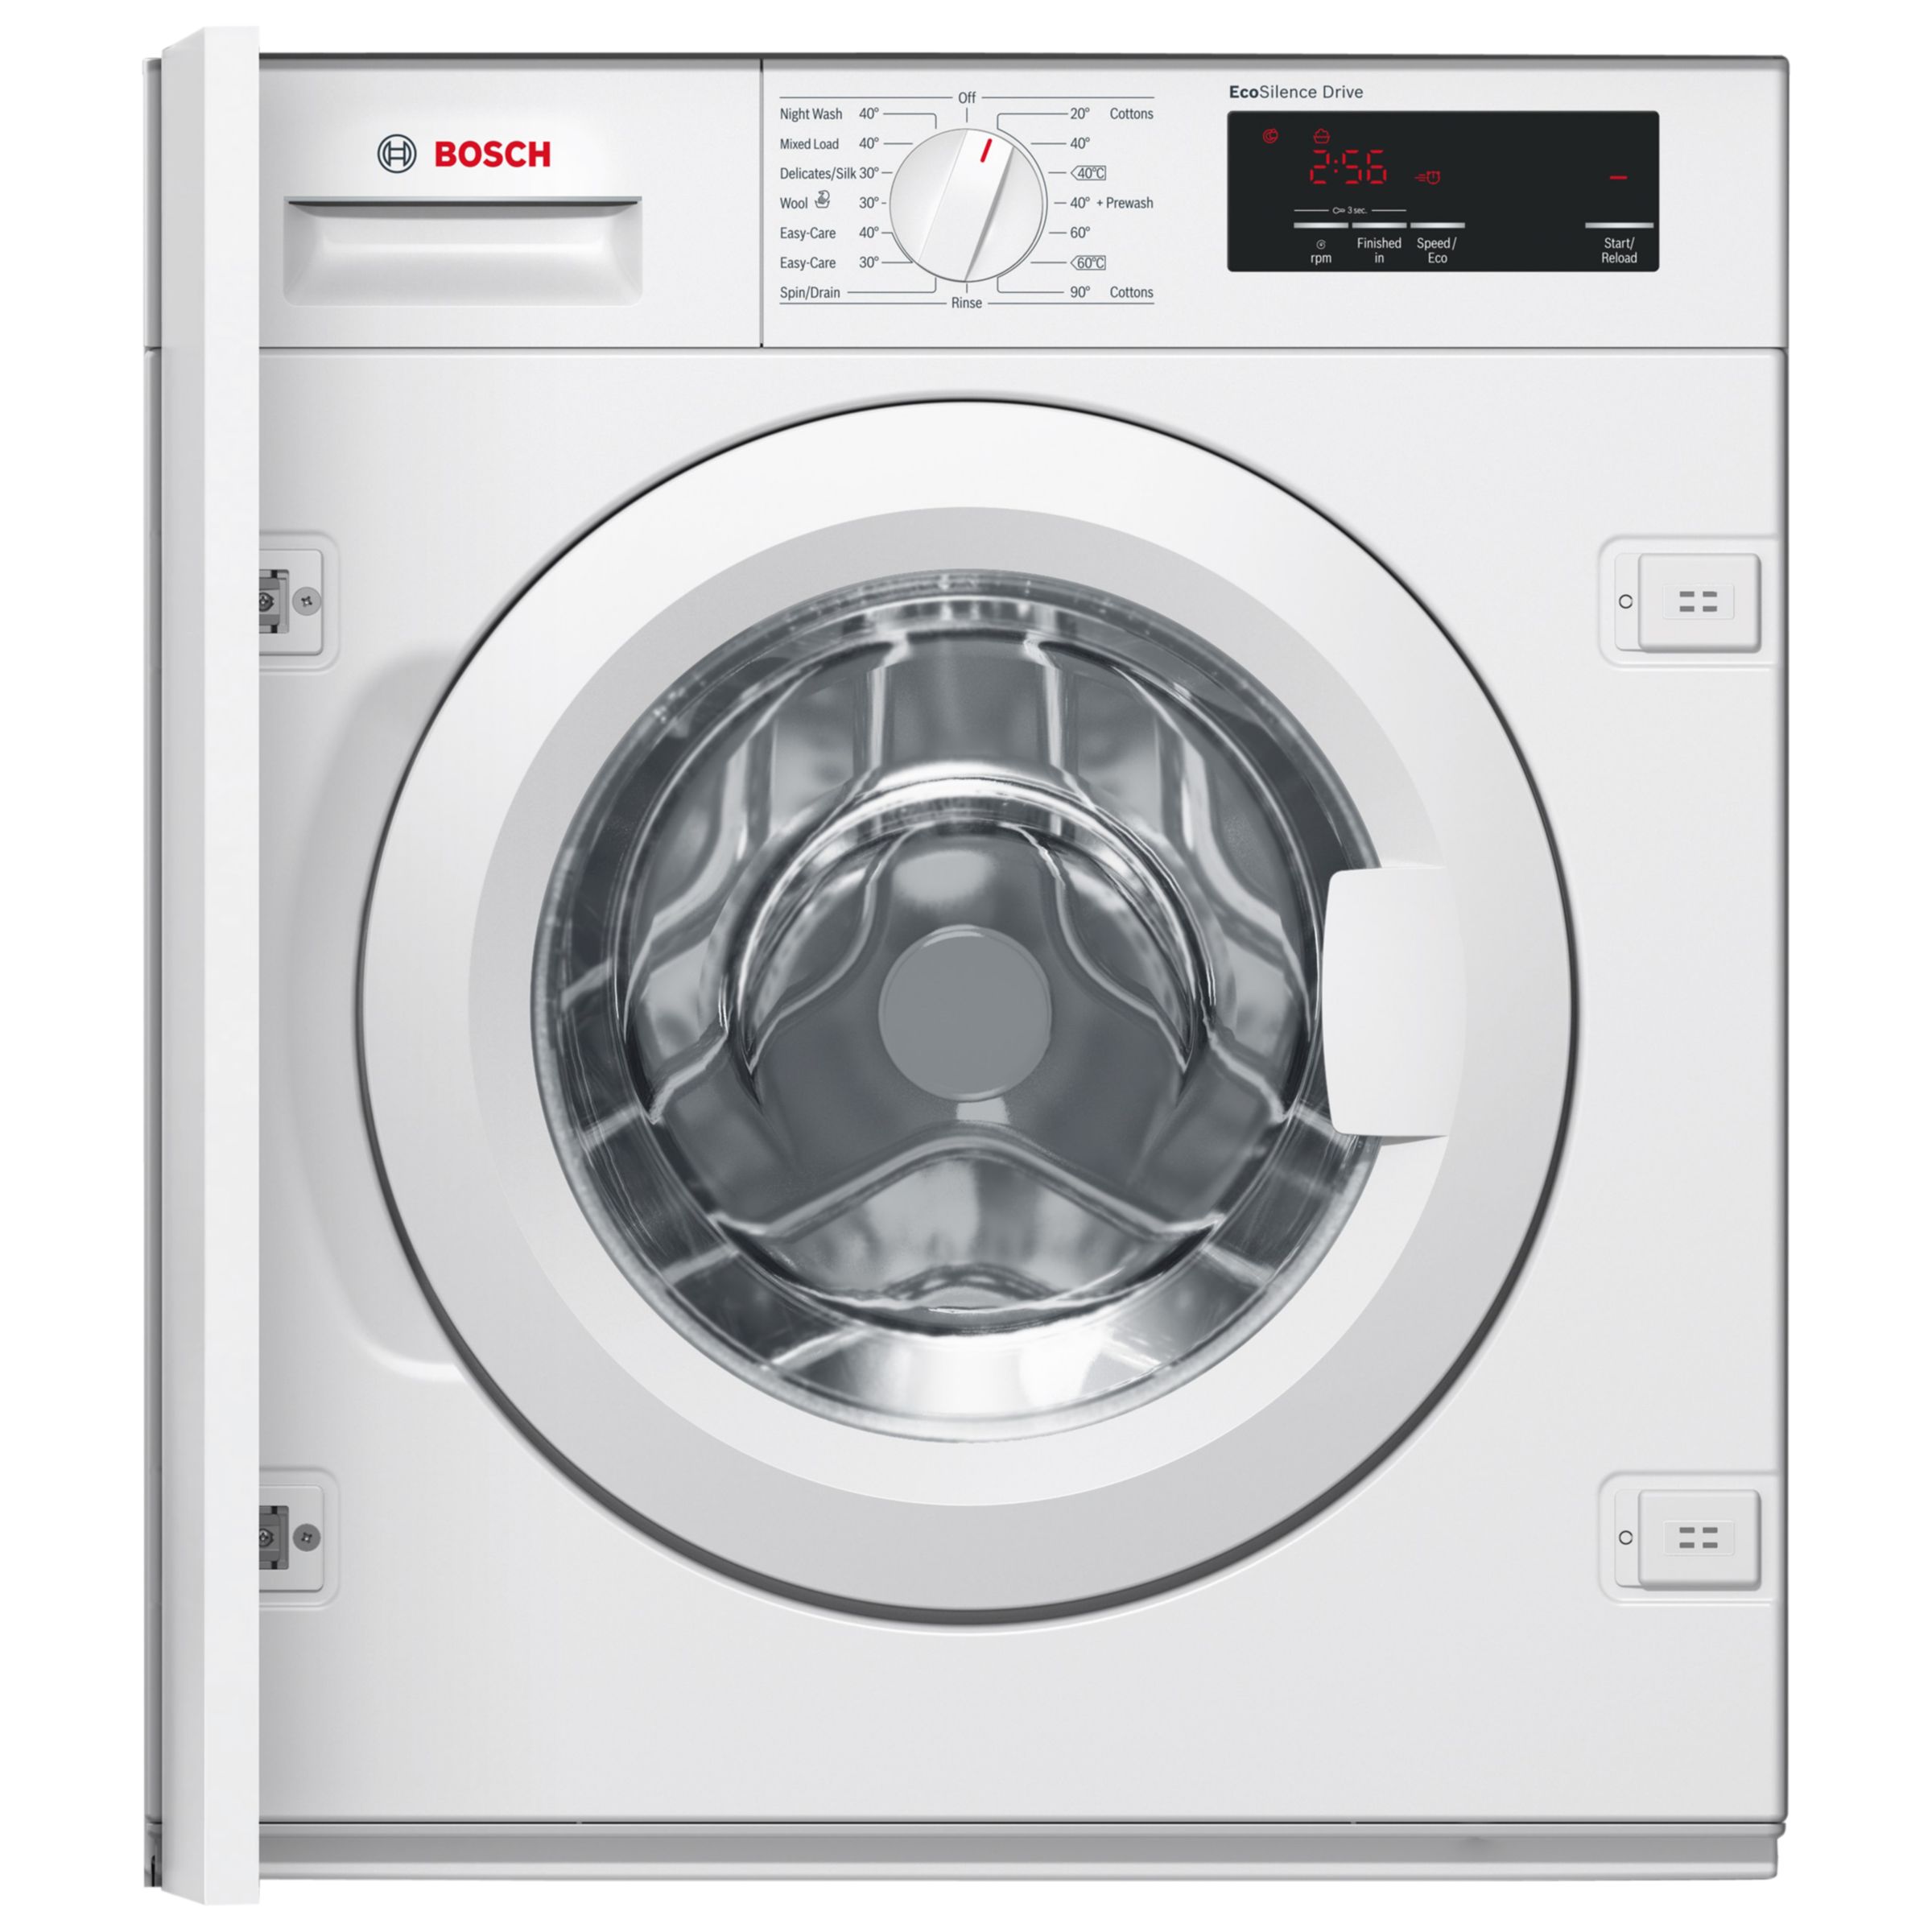 Bosch WIW28300GB Integrated Washing Machine, 8kg Load, A+++ Energy Rating, 1355rpm Spin, White